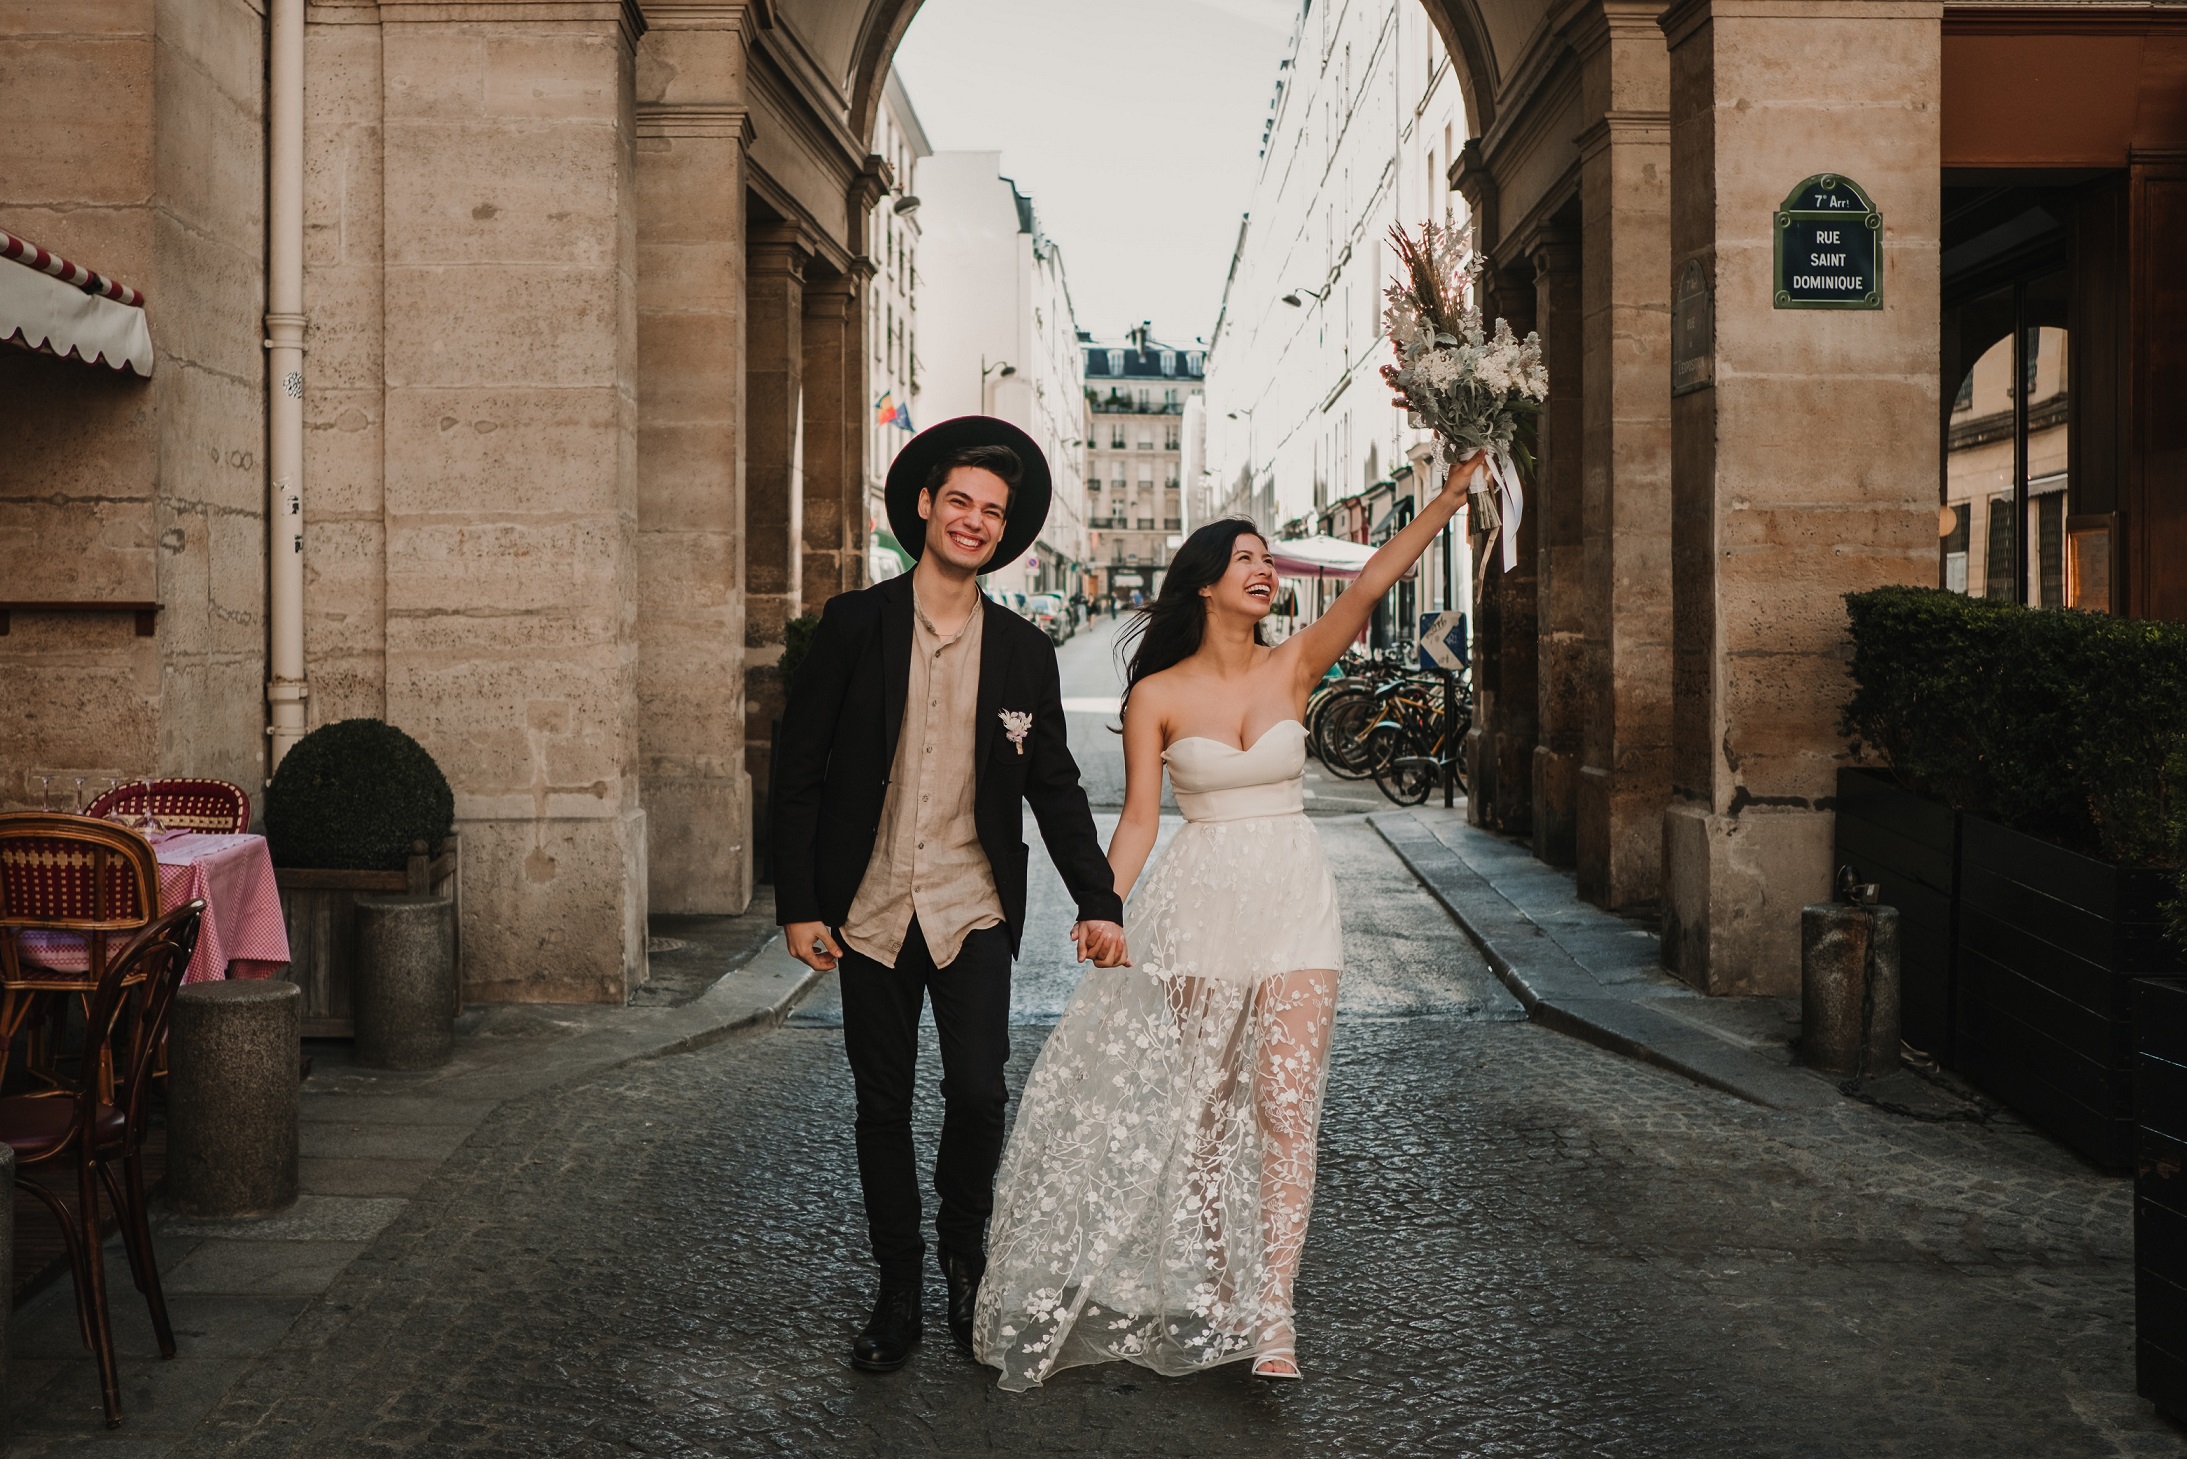 Bride and groom smiling as they walk together through the streets of Paris following their elopement.